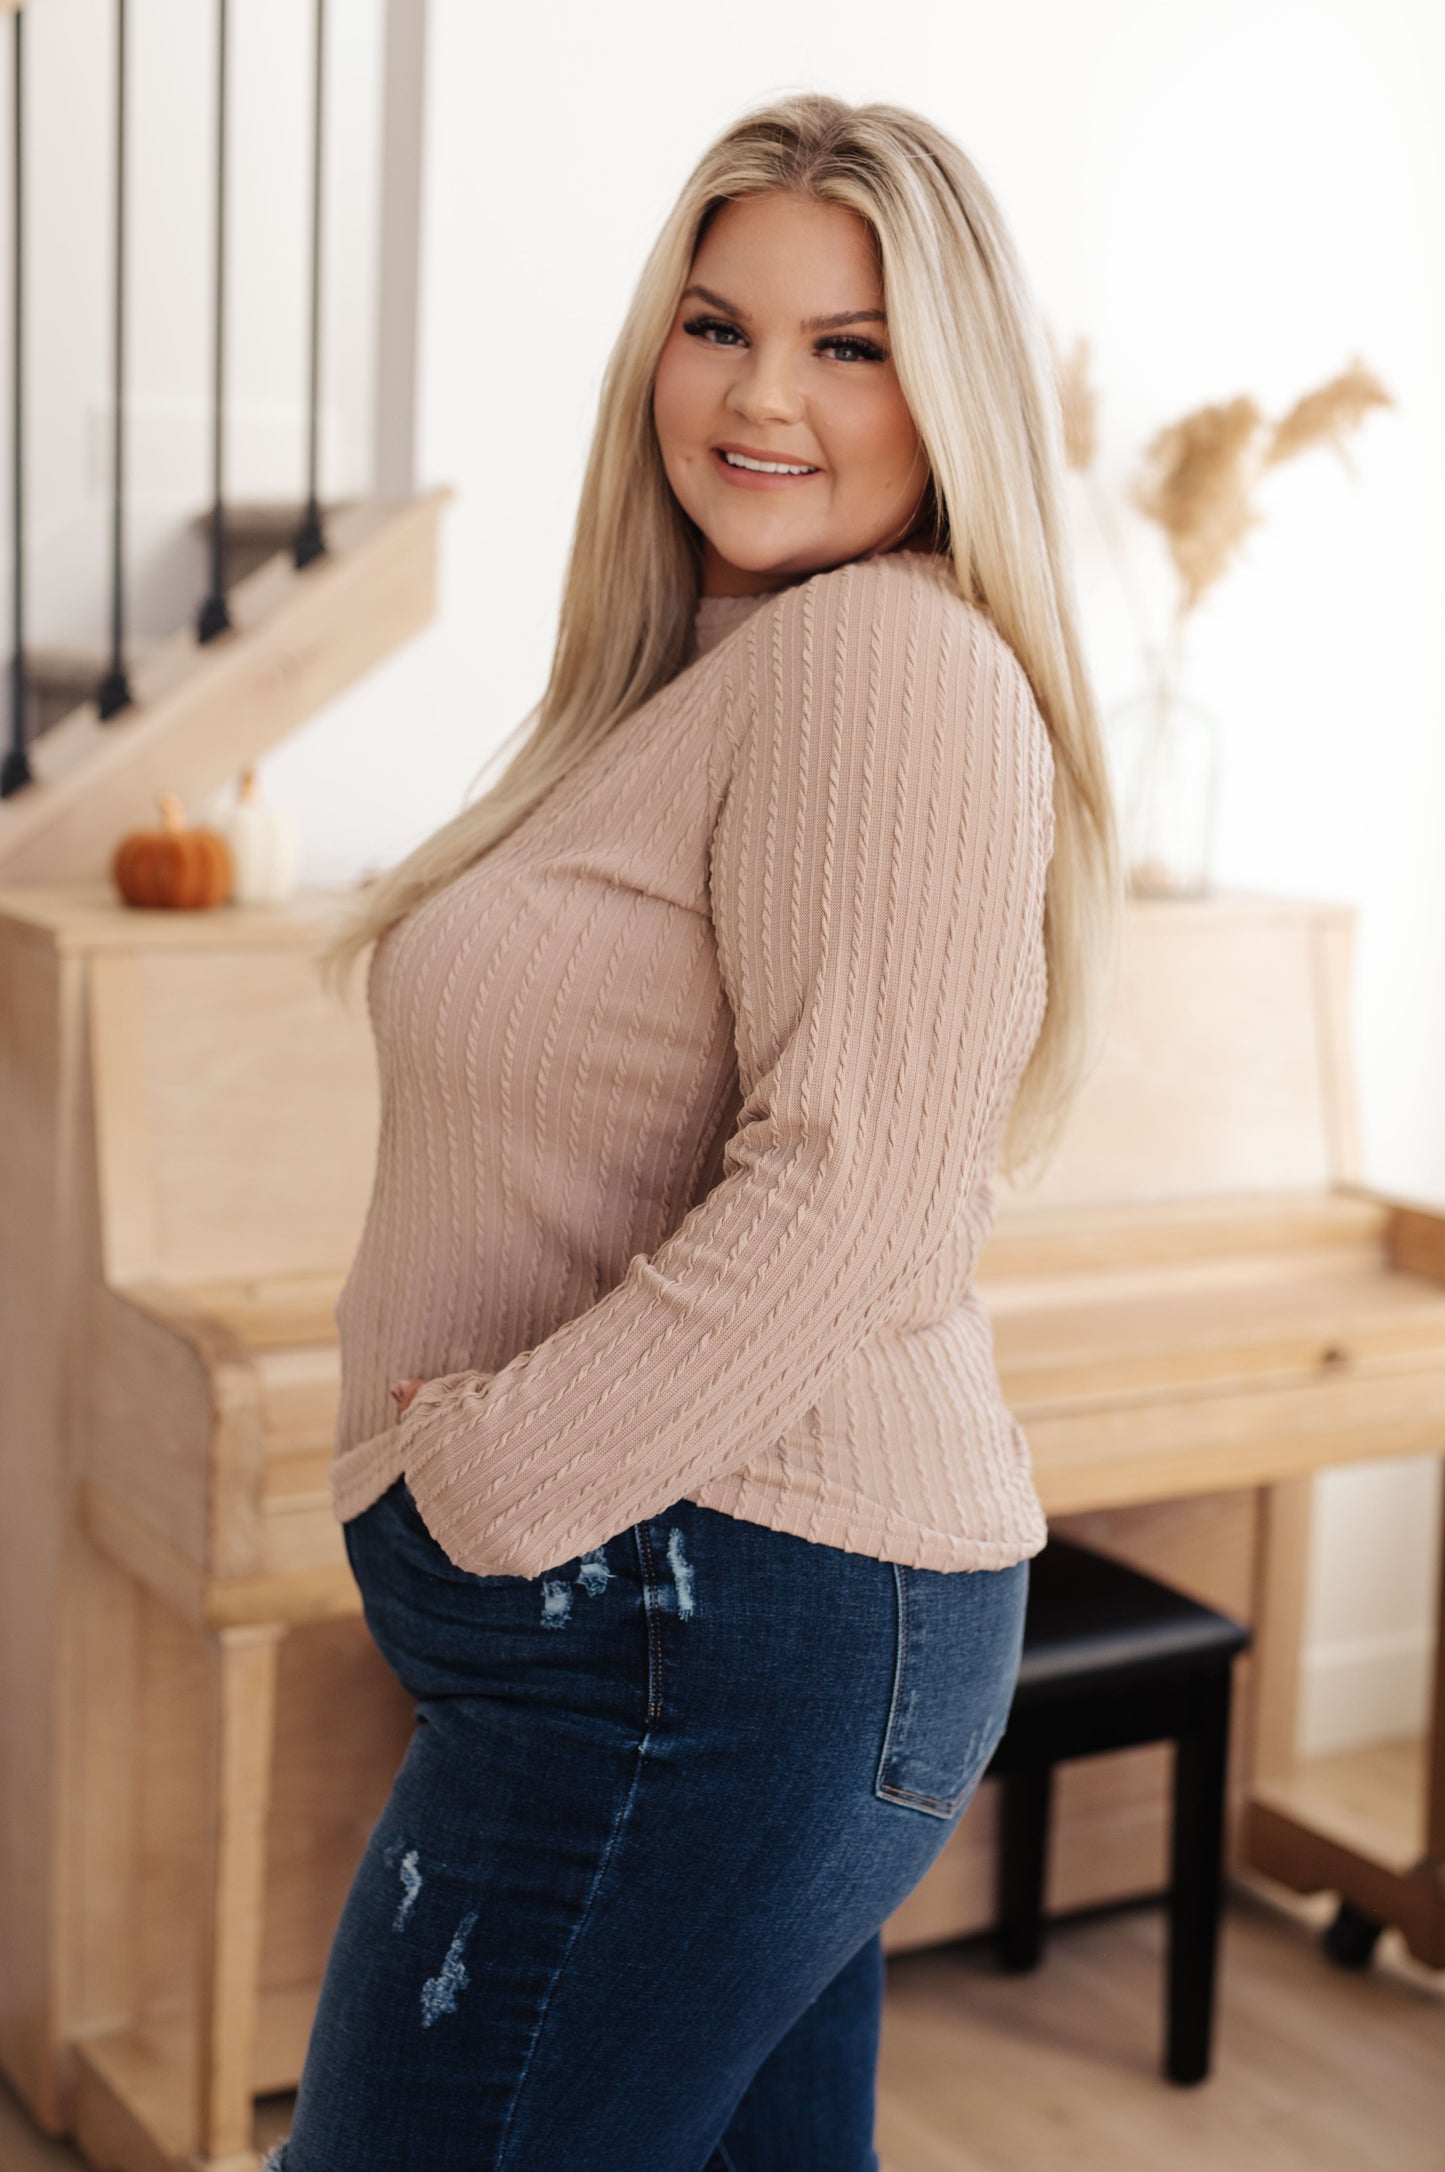 Soothe your senses in this Winding Down Cable Detail Top. A textured knit with raglan sleeves and round neckline will keep you feeling comfortable and stylish. Enjoy the luxurious softness of this timeless piece. S - 3X